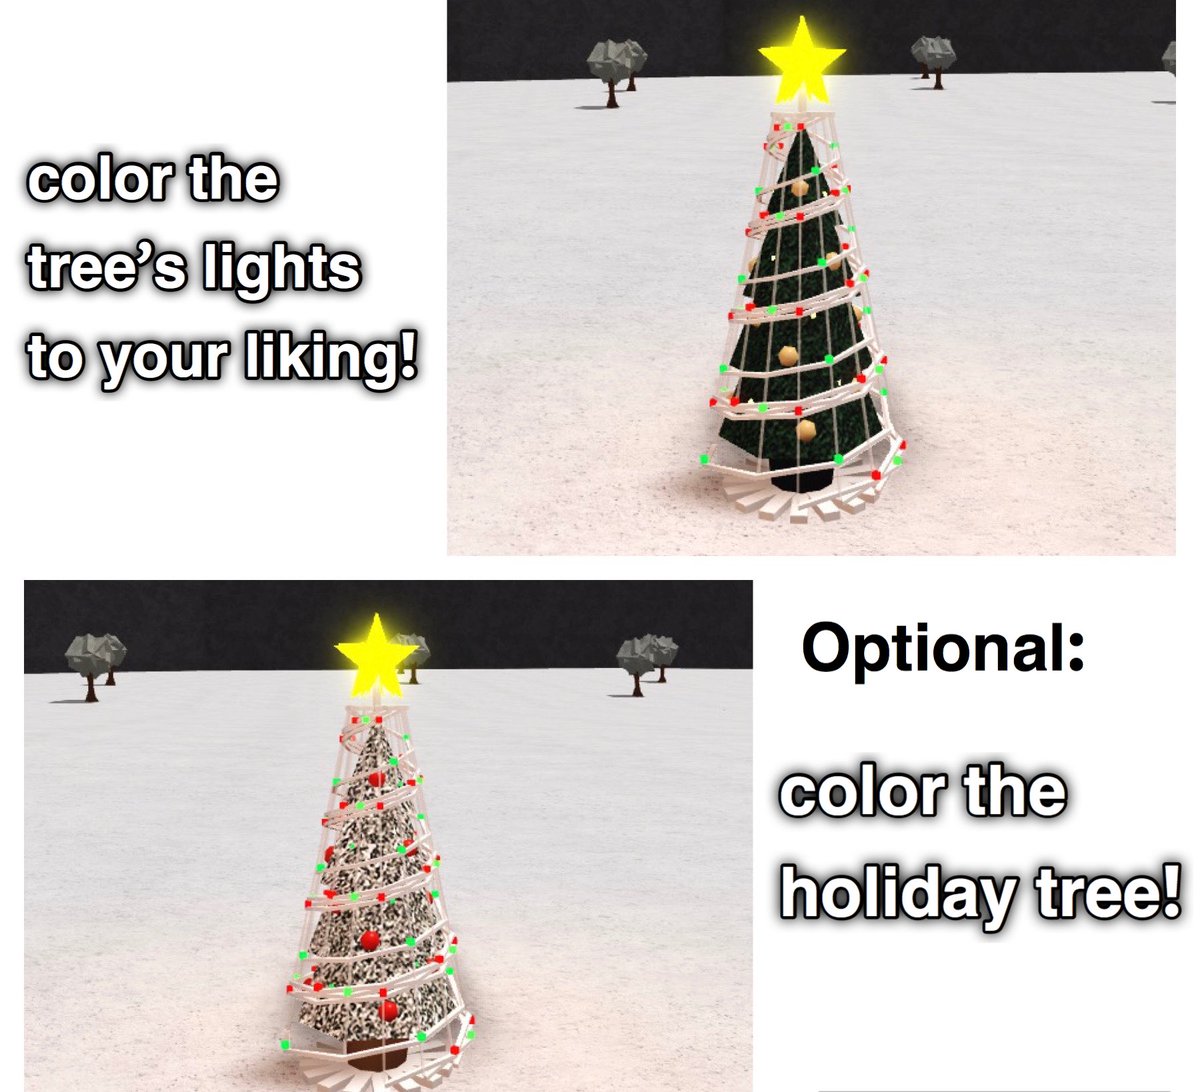 Bloxalerts On Twitter Decorative Holiday Tree Finally Got A New Idea For A Cute Design Let Us Know What Else You D Like To See Roblox Bloxburg Diy Christmas Https T Co 2rk2cbstjq - christmas lights roblox bloxburg